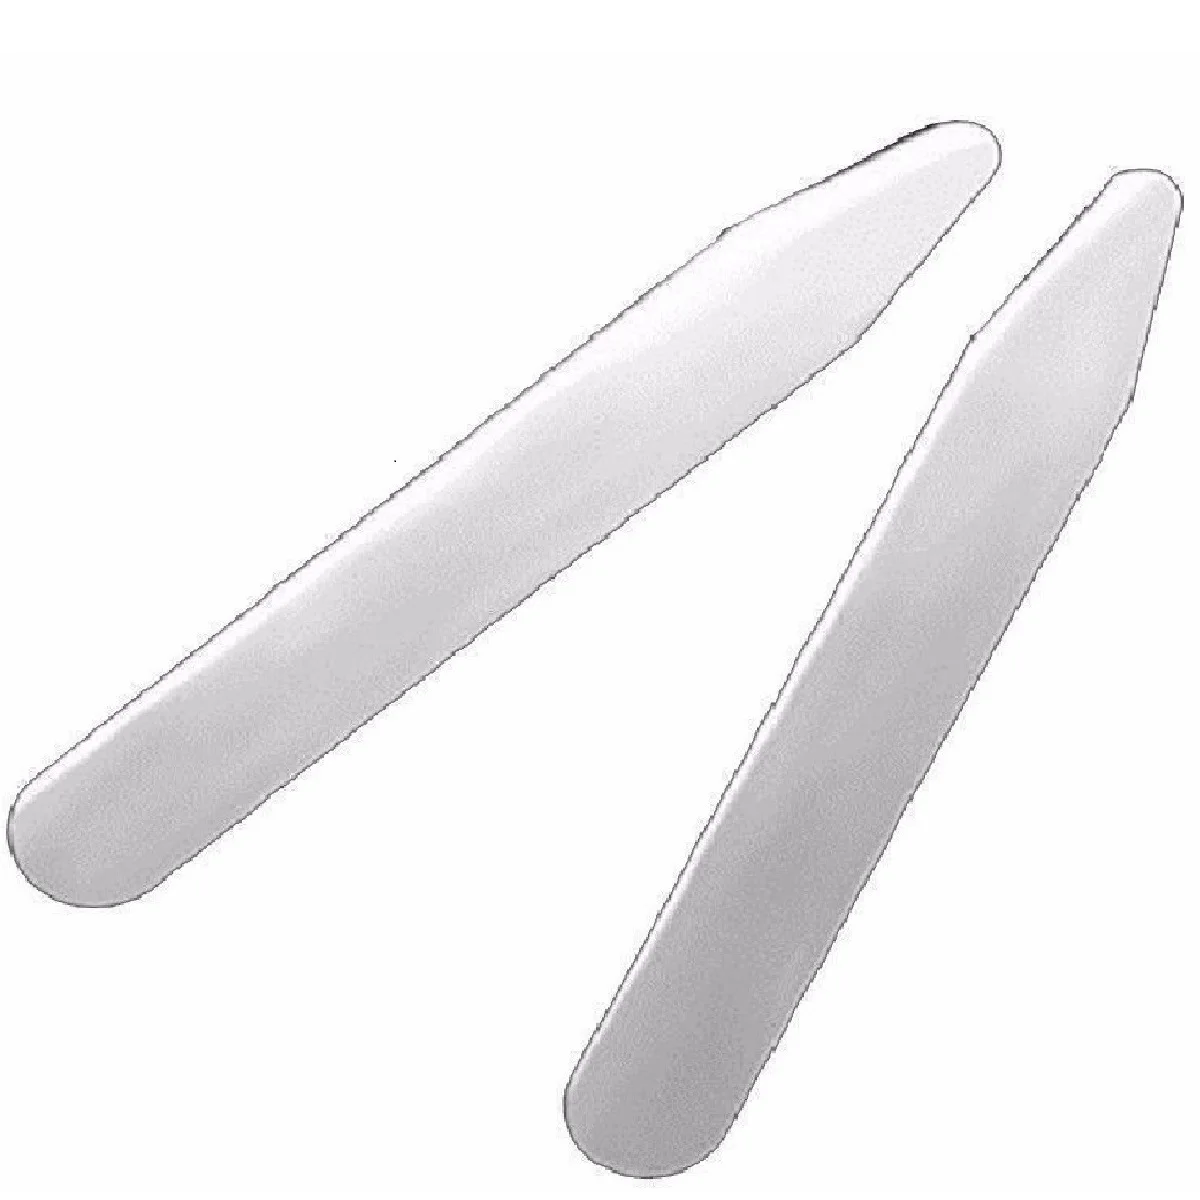 Made In USA 2.5 Inch Metal Collar Stiffeners MODERN GOODS SHOP Stainless Steel Collar Stays With Laser Engraved Belize Design